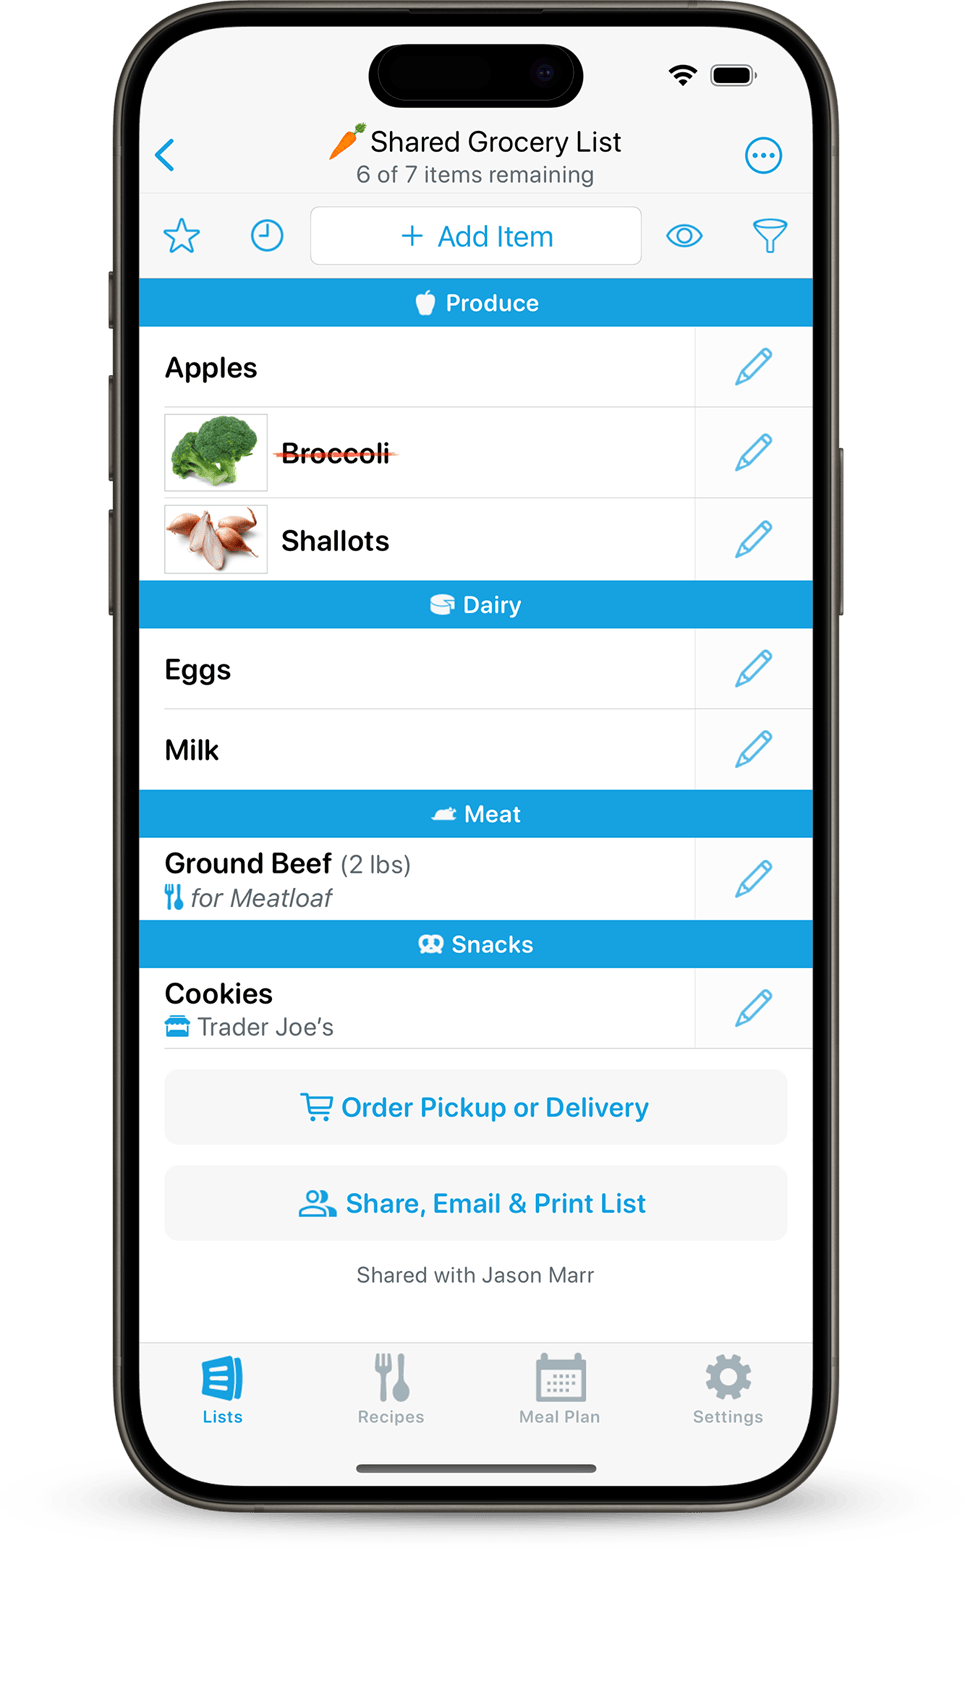 AnyList - The best to create and share a grocery shopping list.